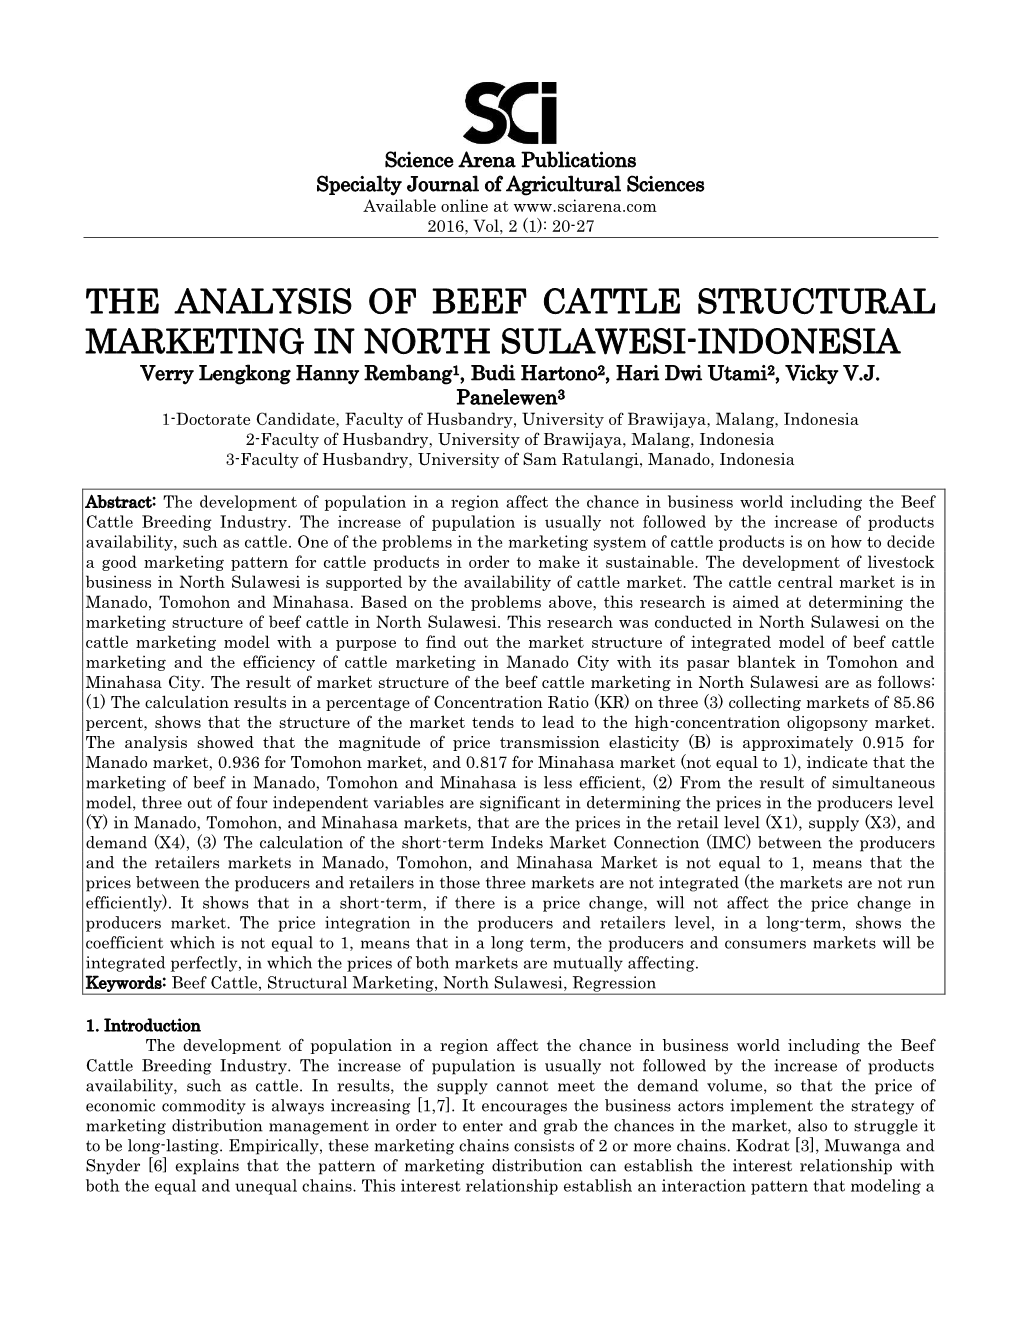 THE ANALYSIS of BEEF CATTLE STRUCTURAL MARKETING in NORTH SULAWESI-INDONESIA Verry Lengkong Hanny Rembang1, Budi Hartono2, Hari Dwi Utami2, Vicky V.J